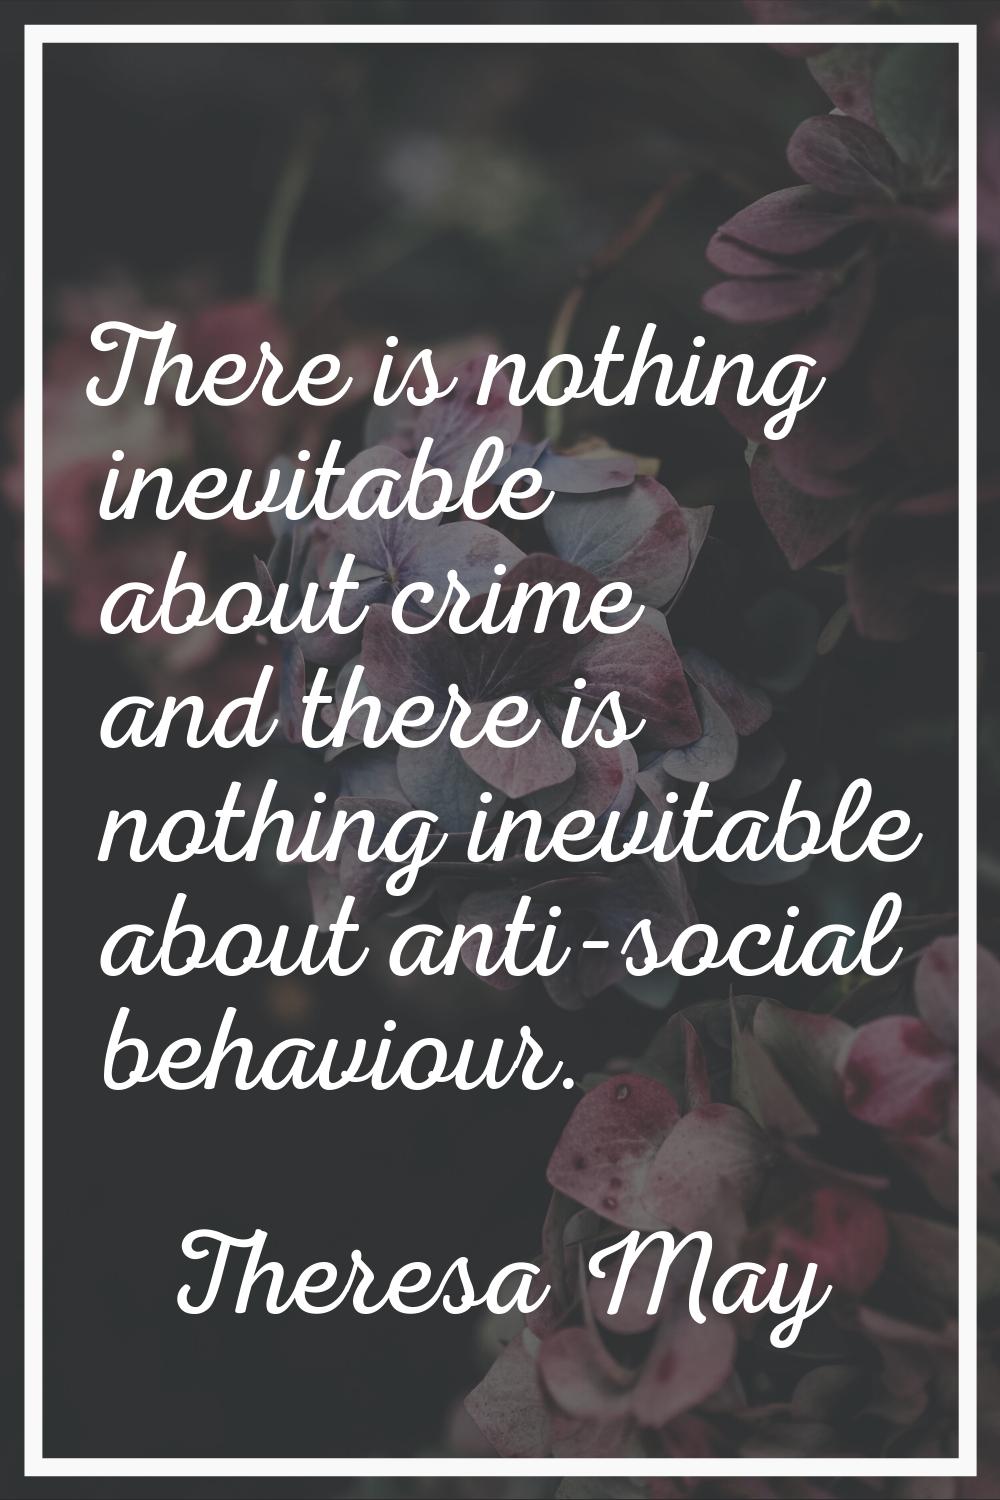 There is nothing inevitable about crime and there is nothing inevitable about anti-social behaviour